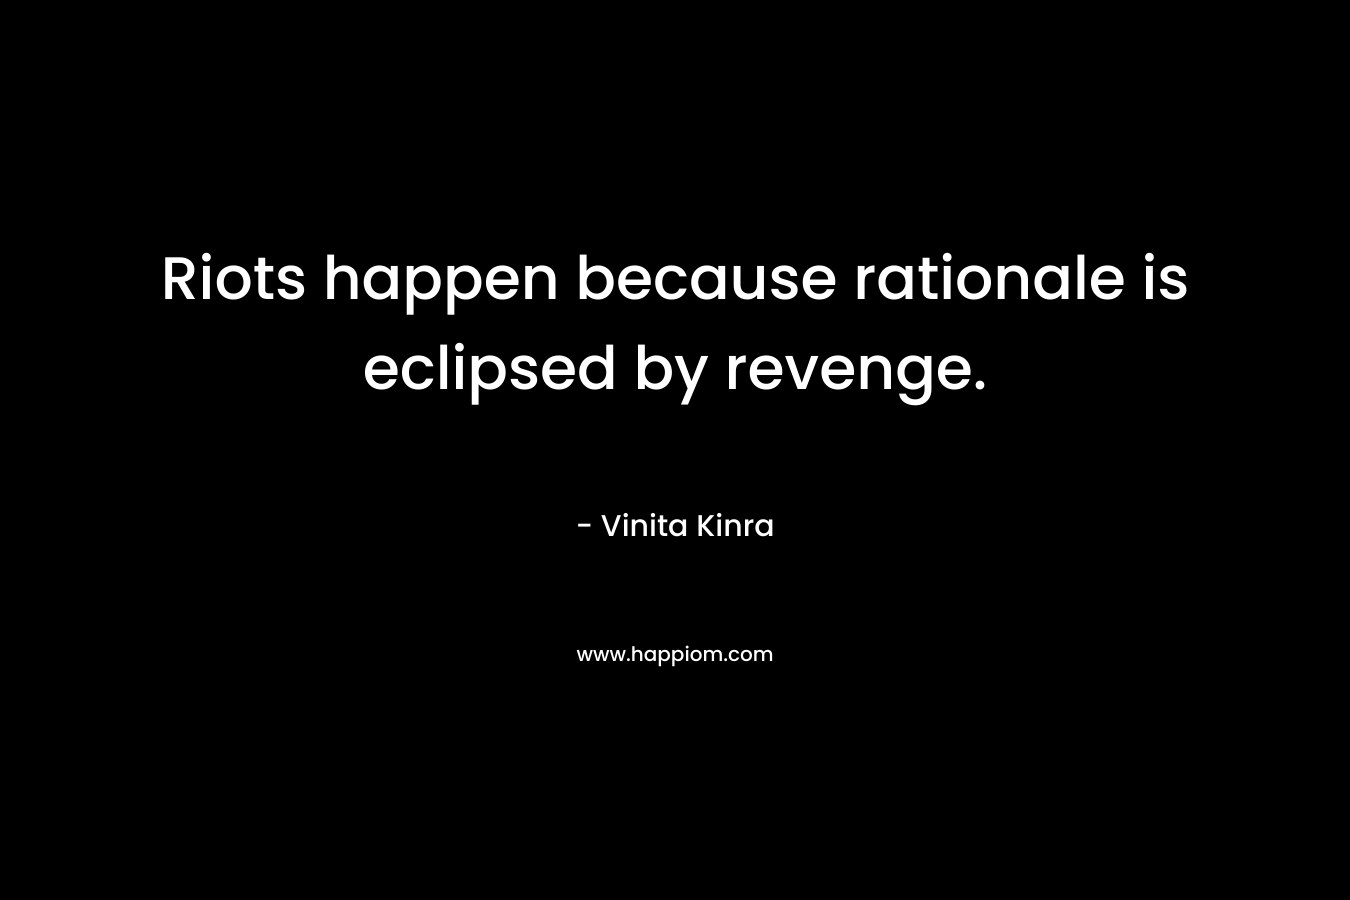 Riots happen because rationale is eclipsed by revenge. – Vinita Kinra